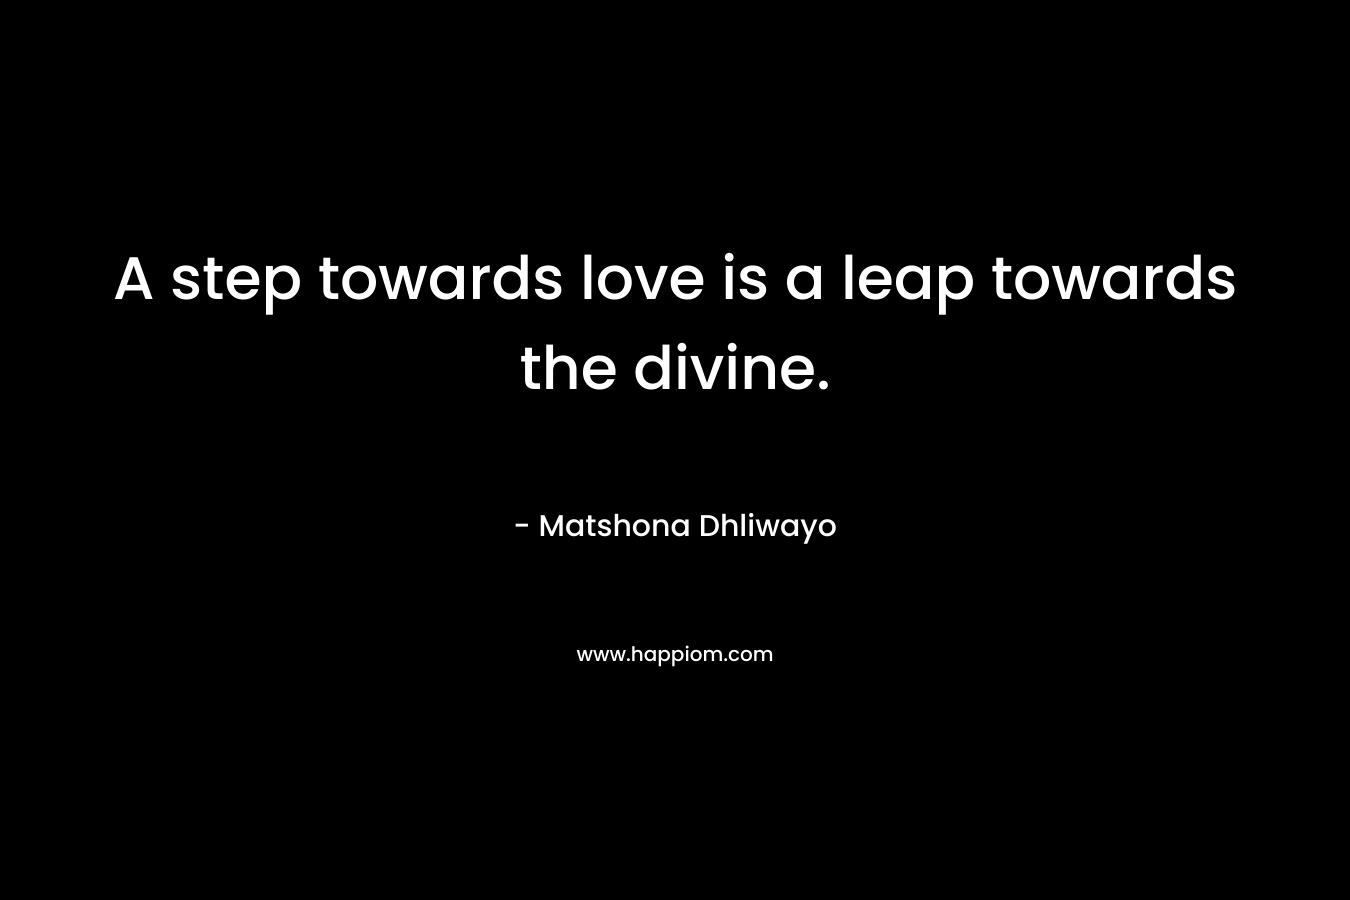 A step towards love is a leap towards the divine.